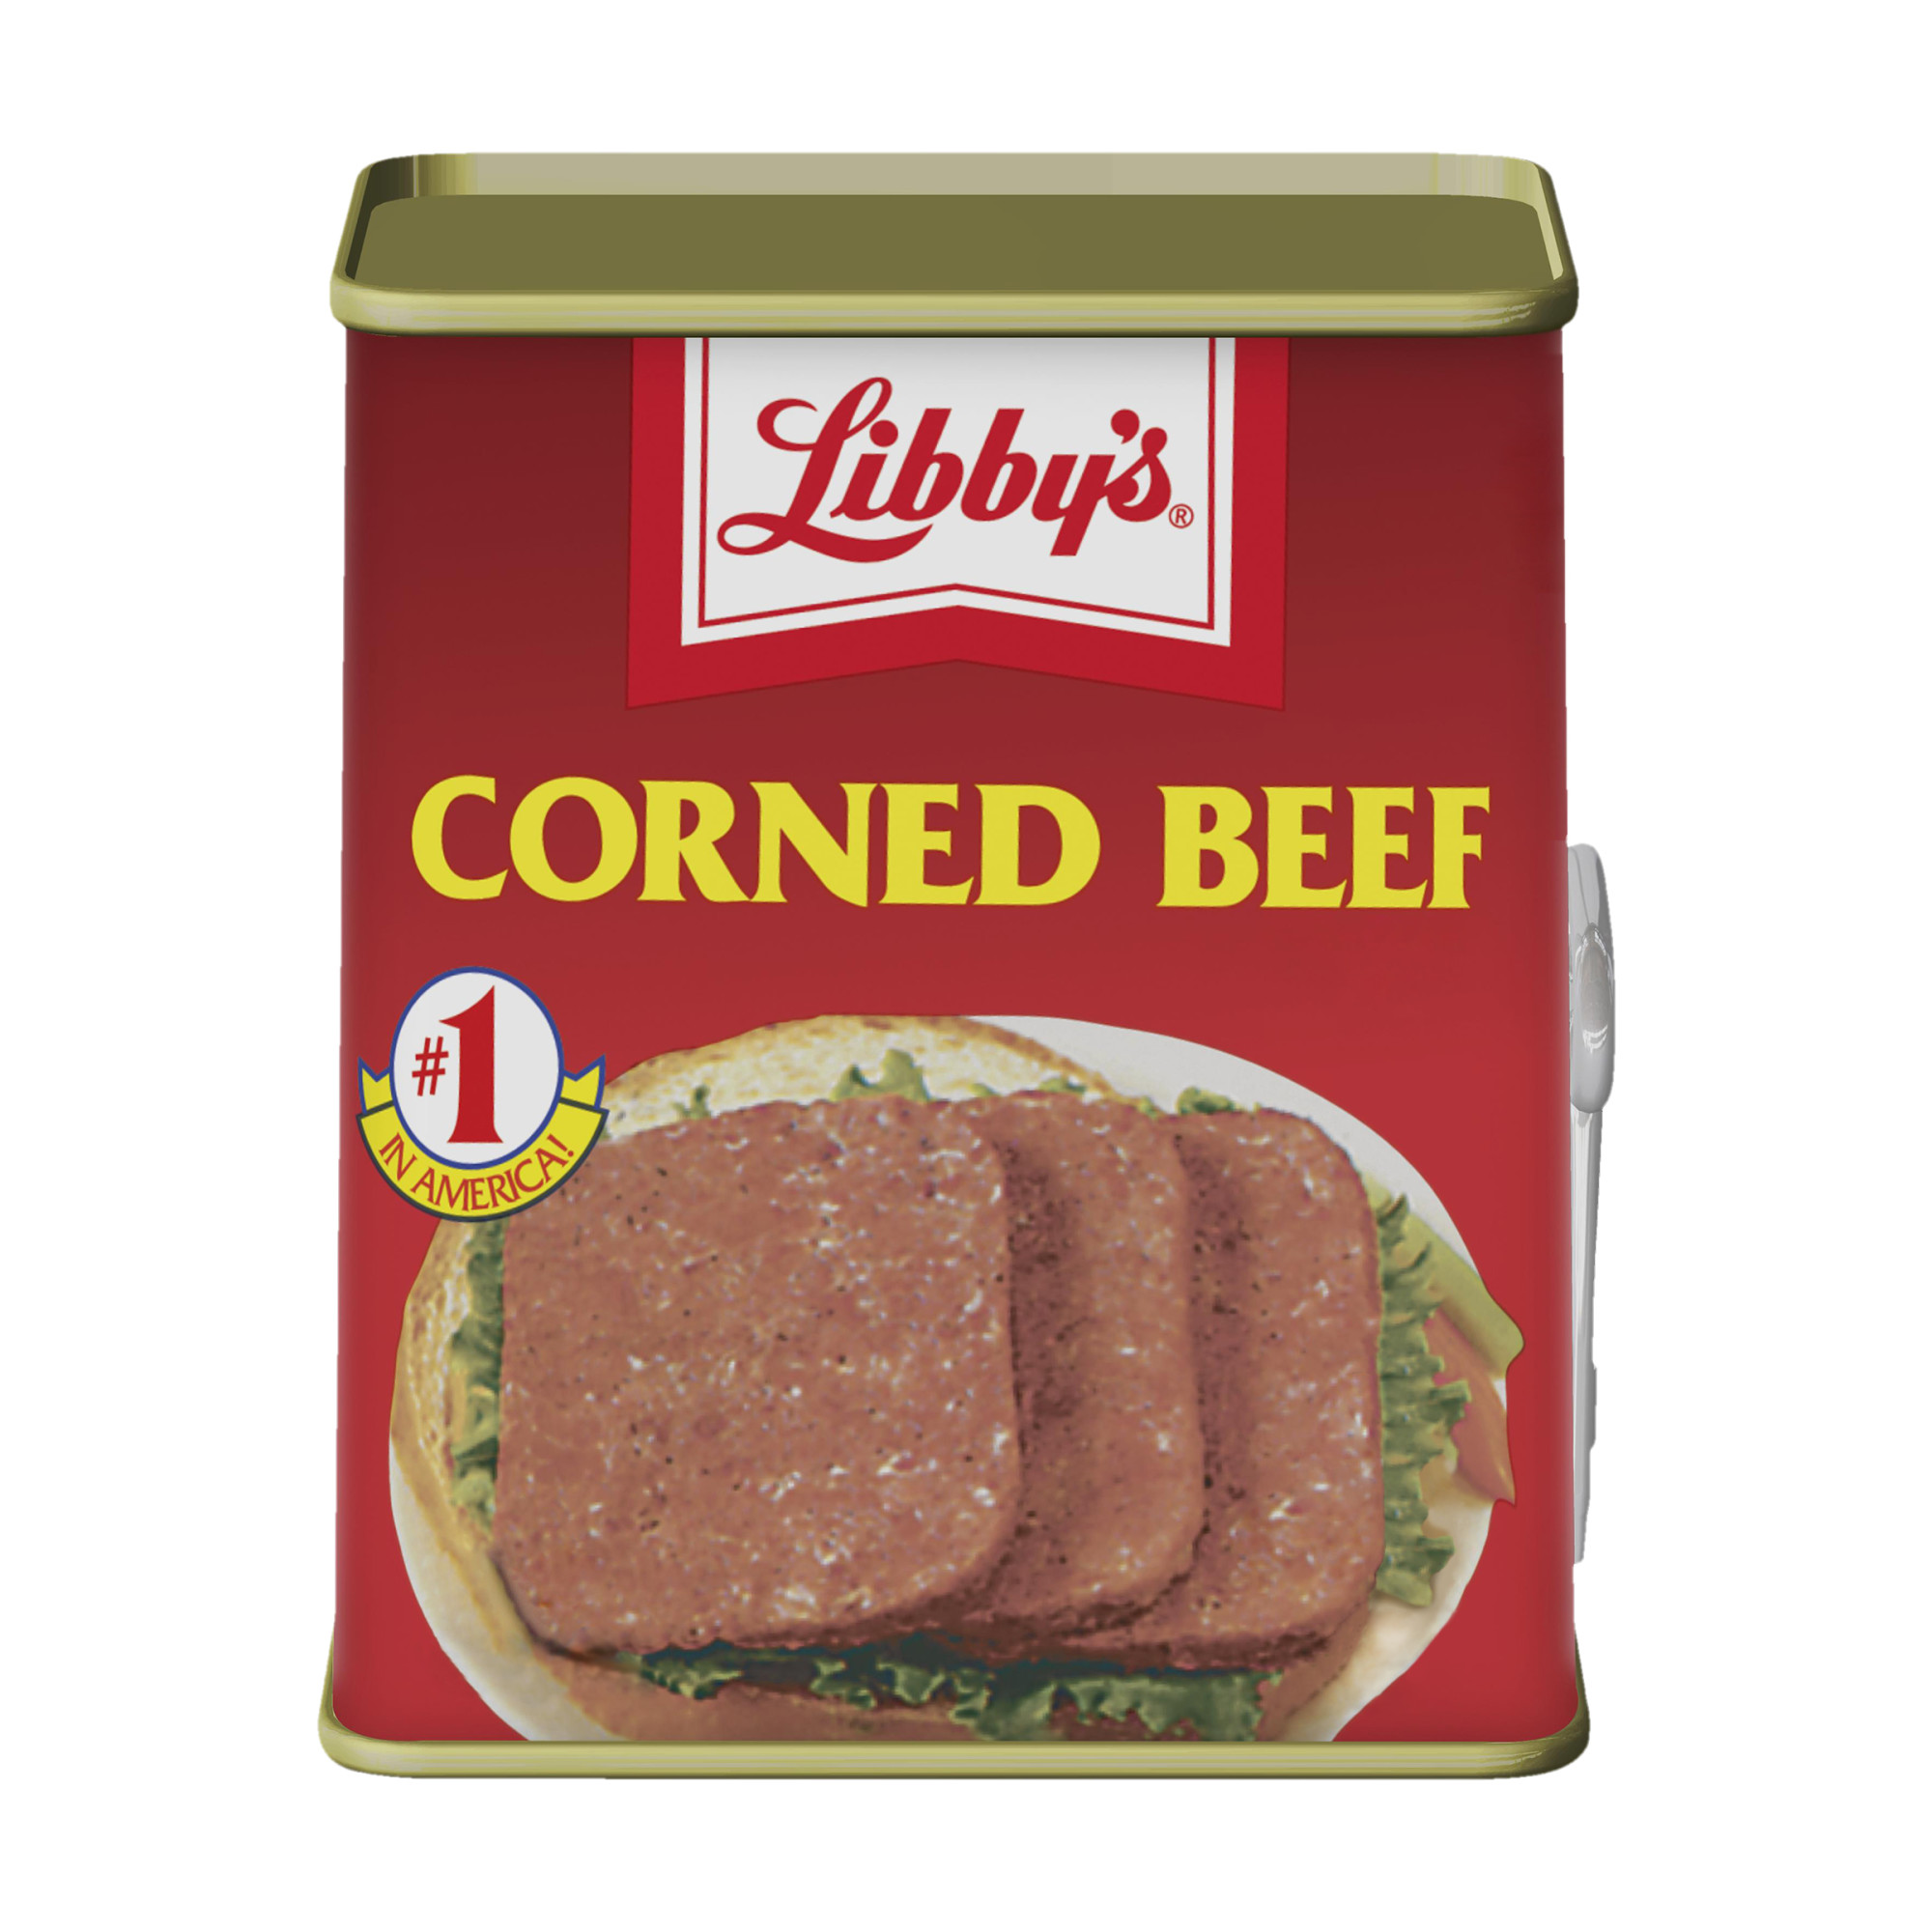 Libby's Corned Beef, 12 oz Can - image 1 of 7